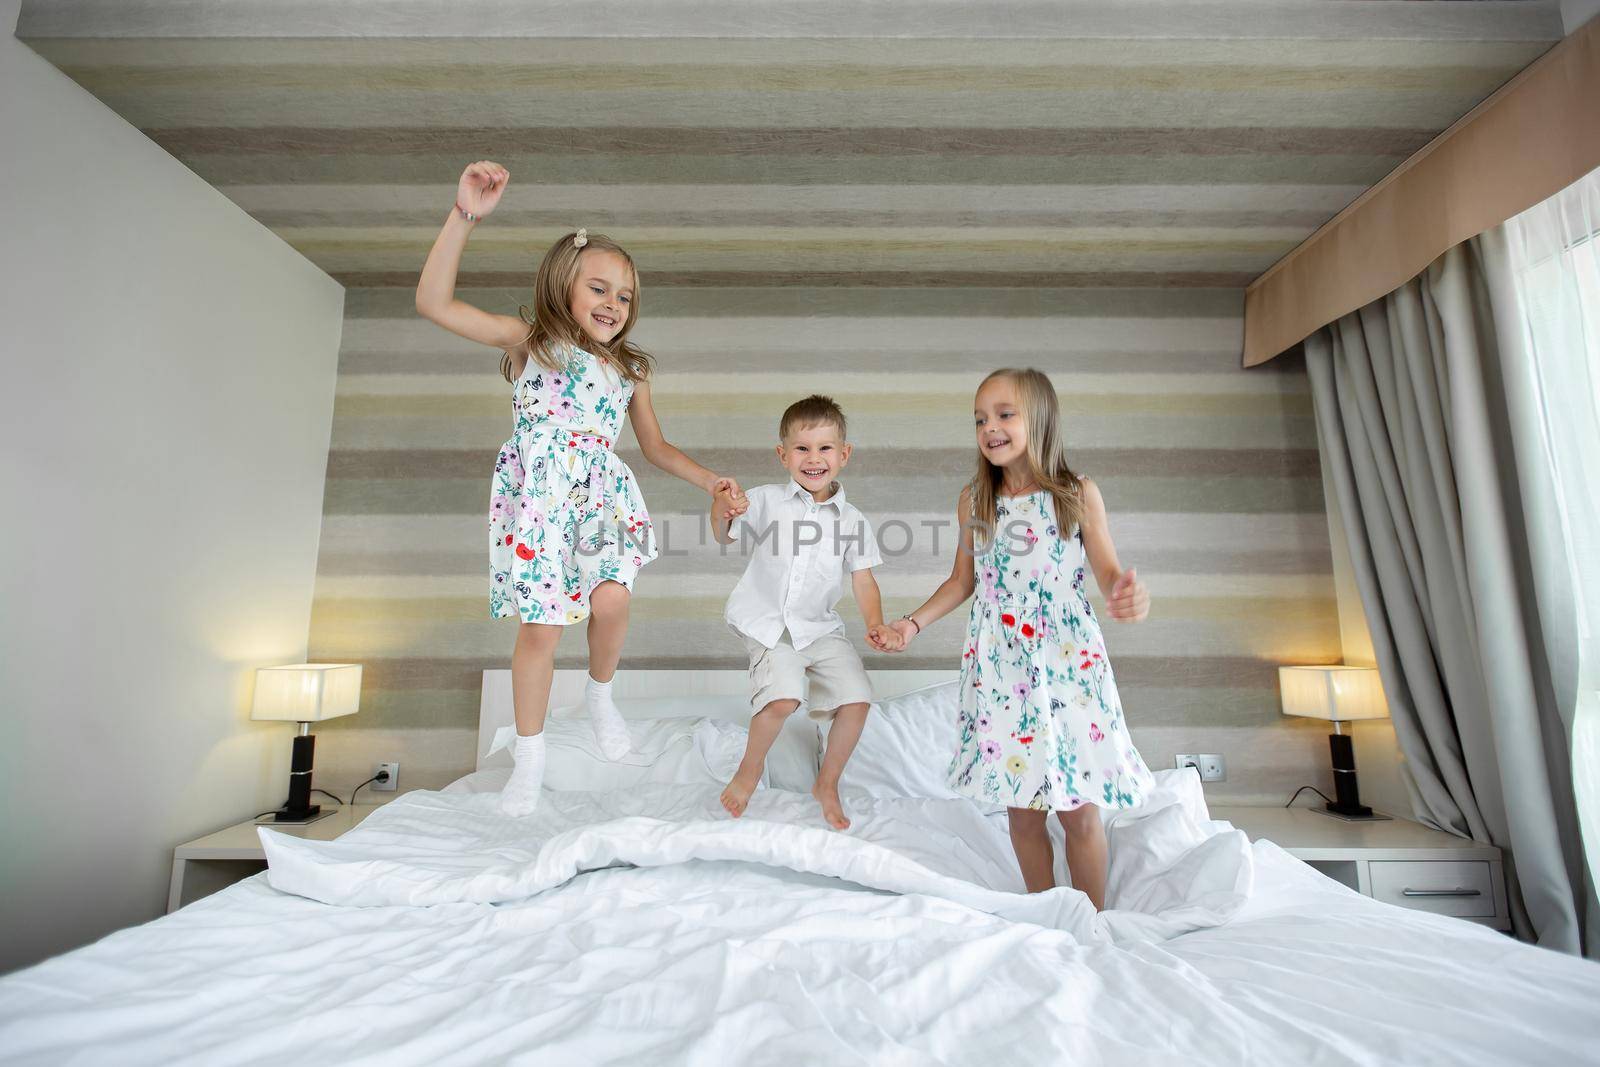 Happy kids jumping, having fun, playing on bed in bedroom. by StudioPeace